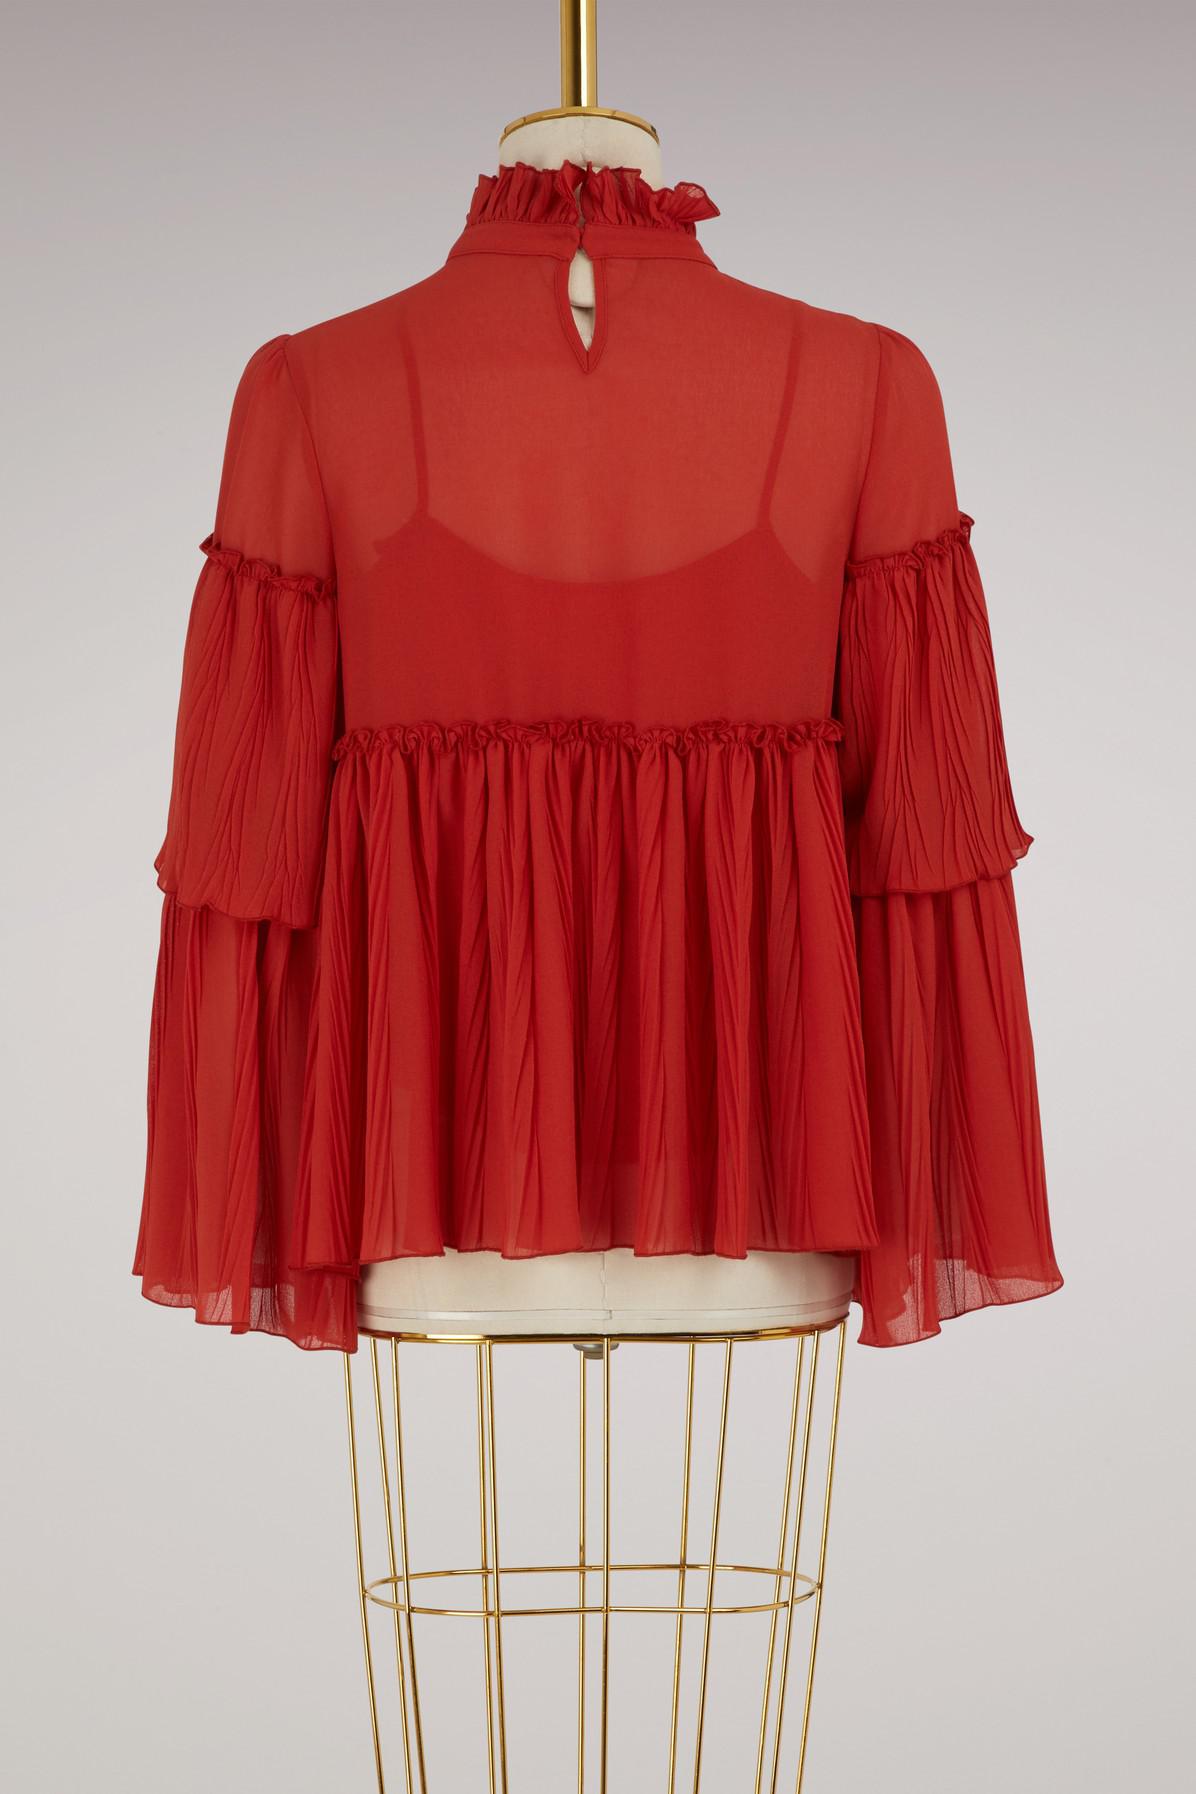 See By Chloé Denim Pleated Top in Earthy Red (Red) - Lyst